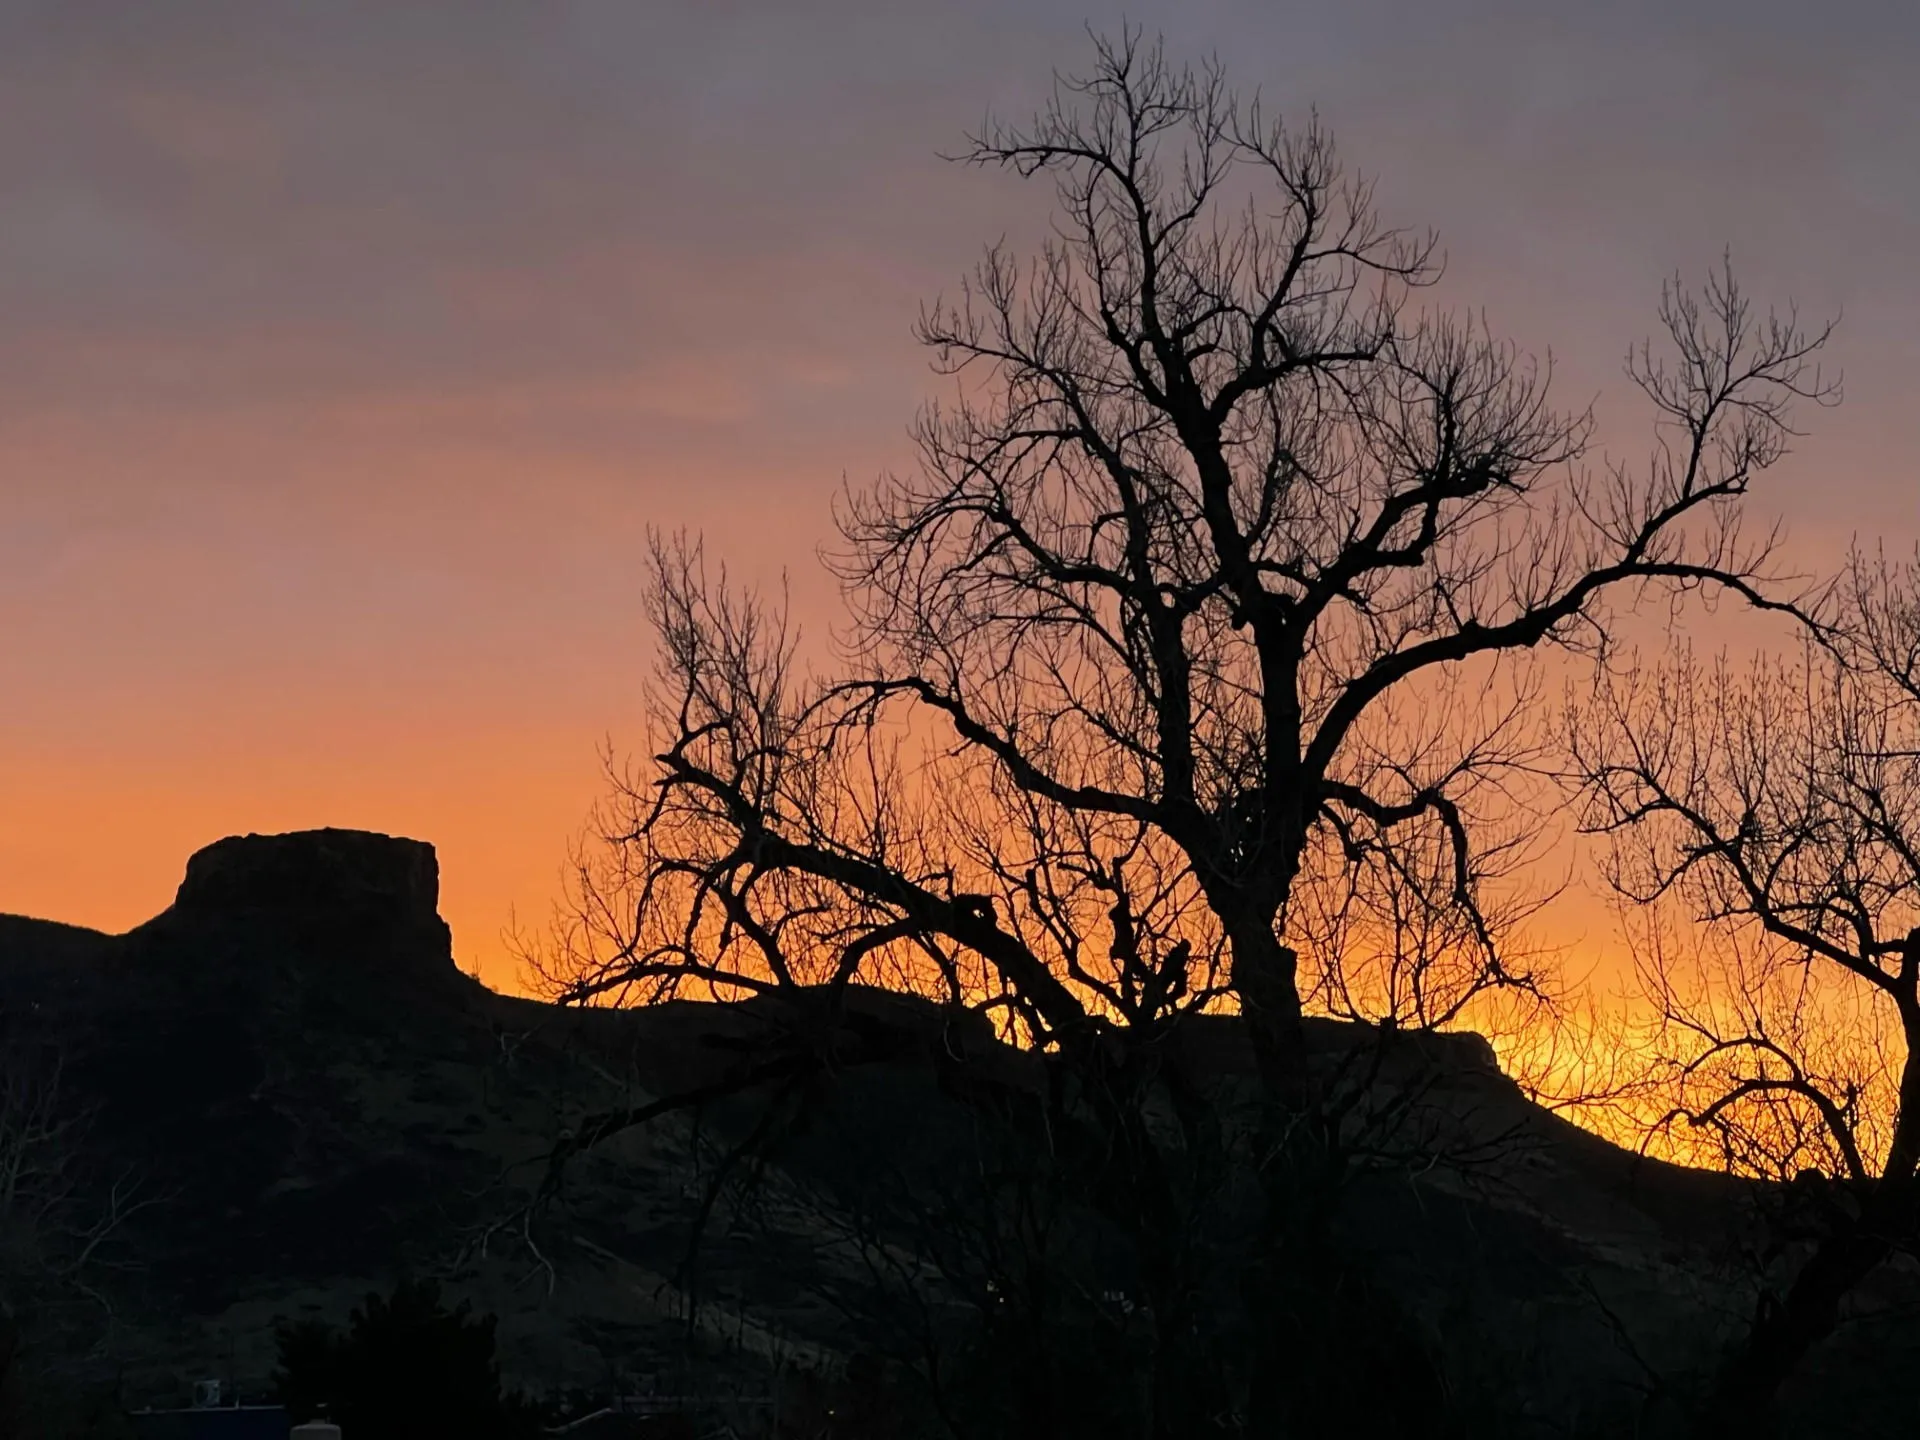 South Table Mountain and some bare trees are silhouetted in front of a glorious peach-colored sunrise